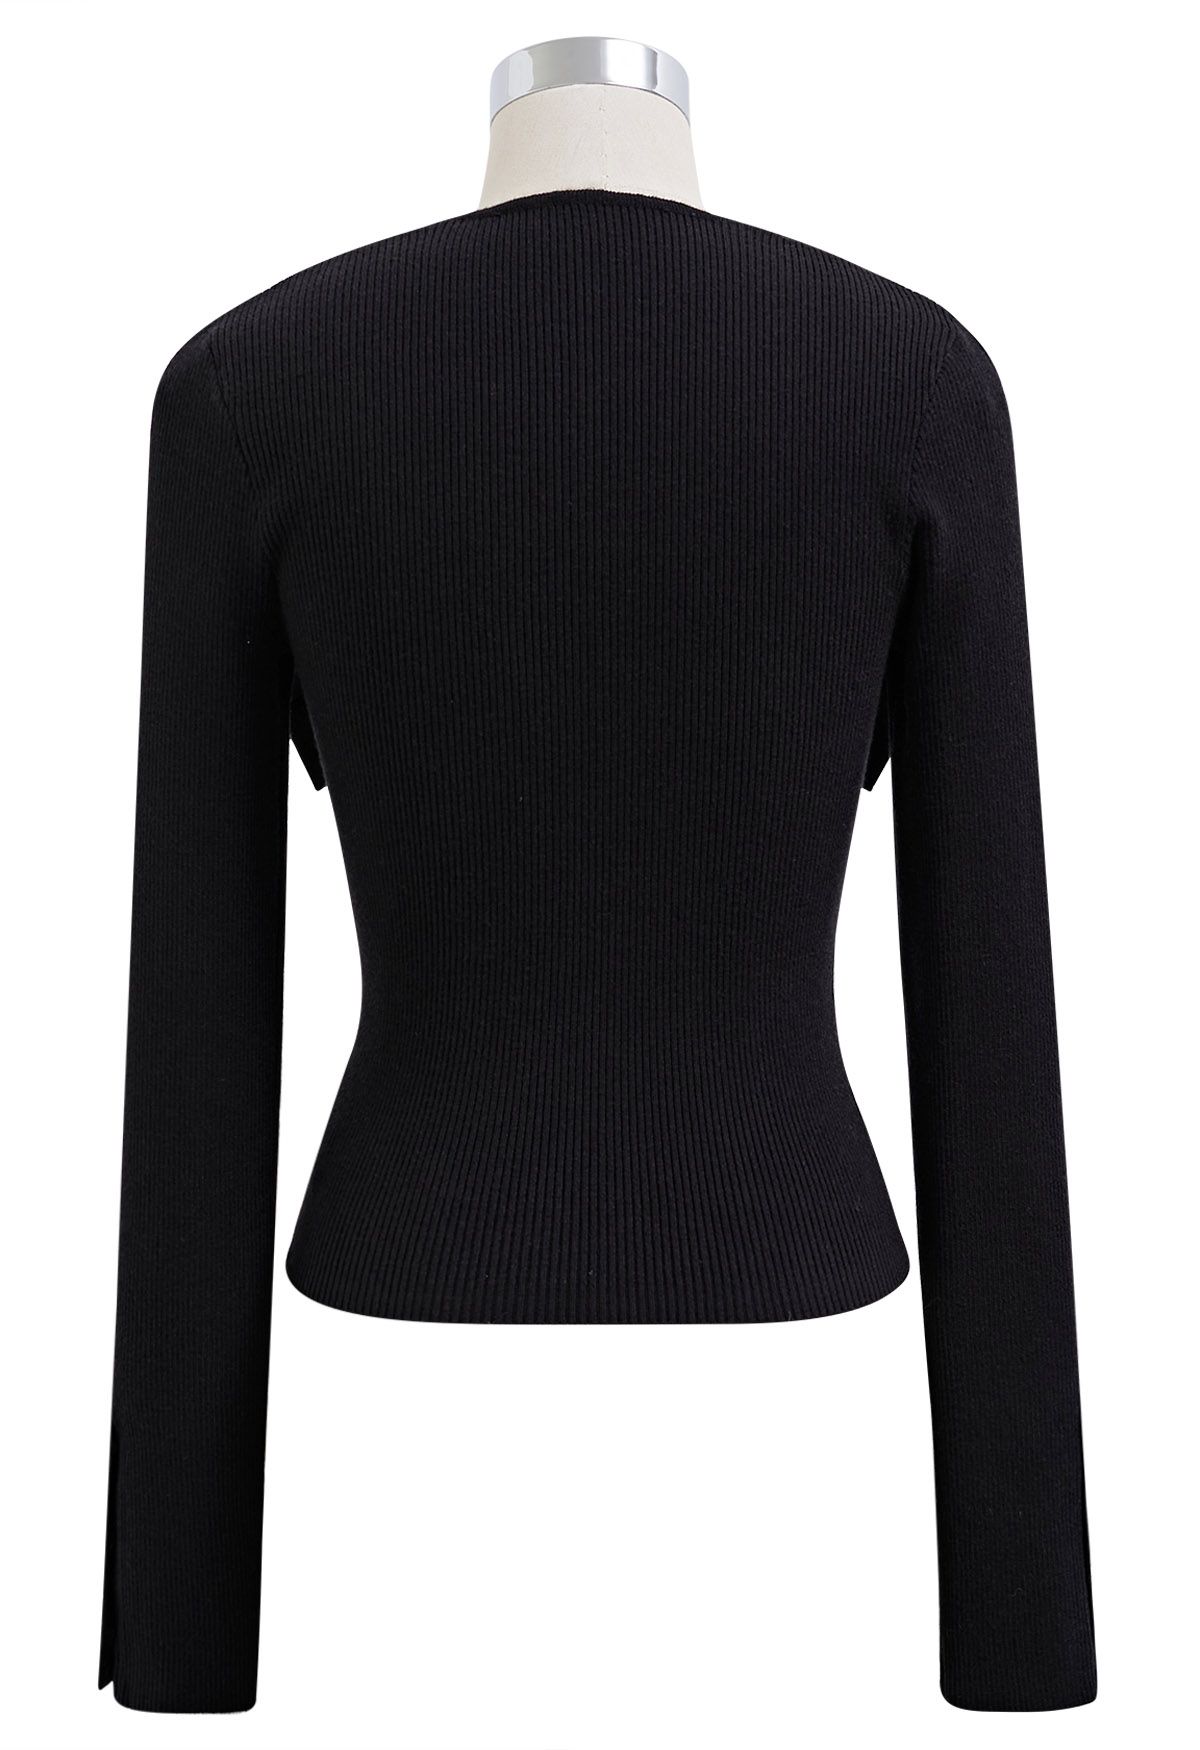 Bowknot Neckline Fitted Knit Top in Black